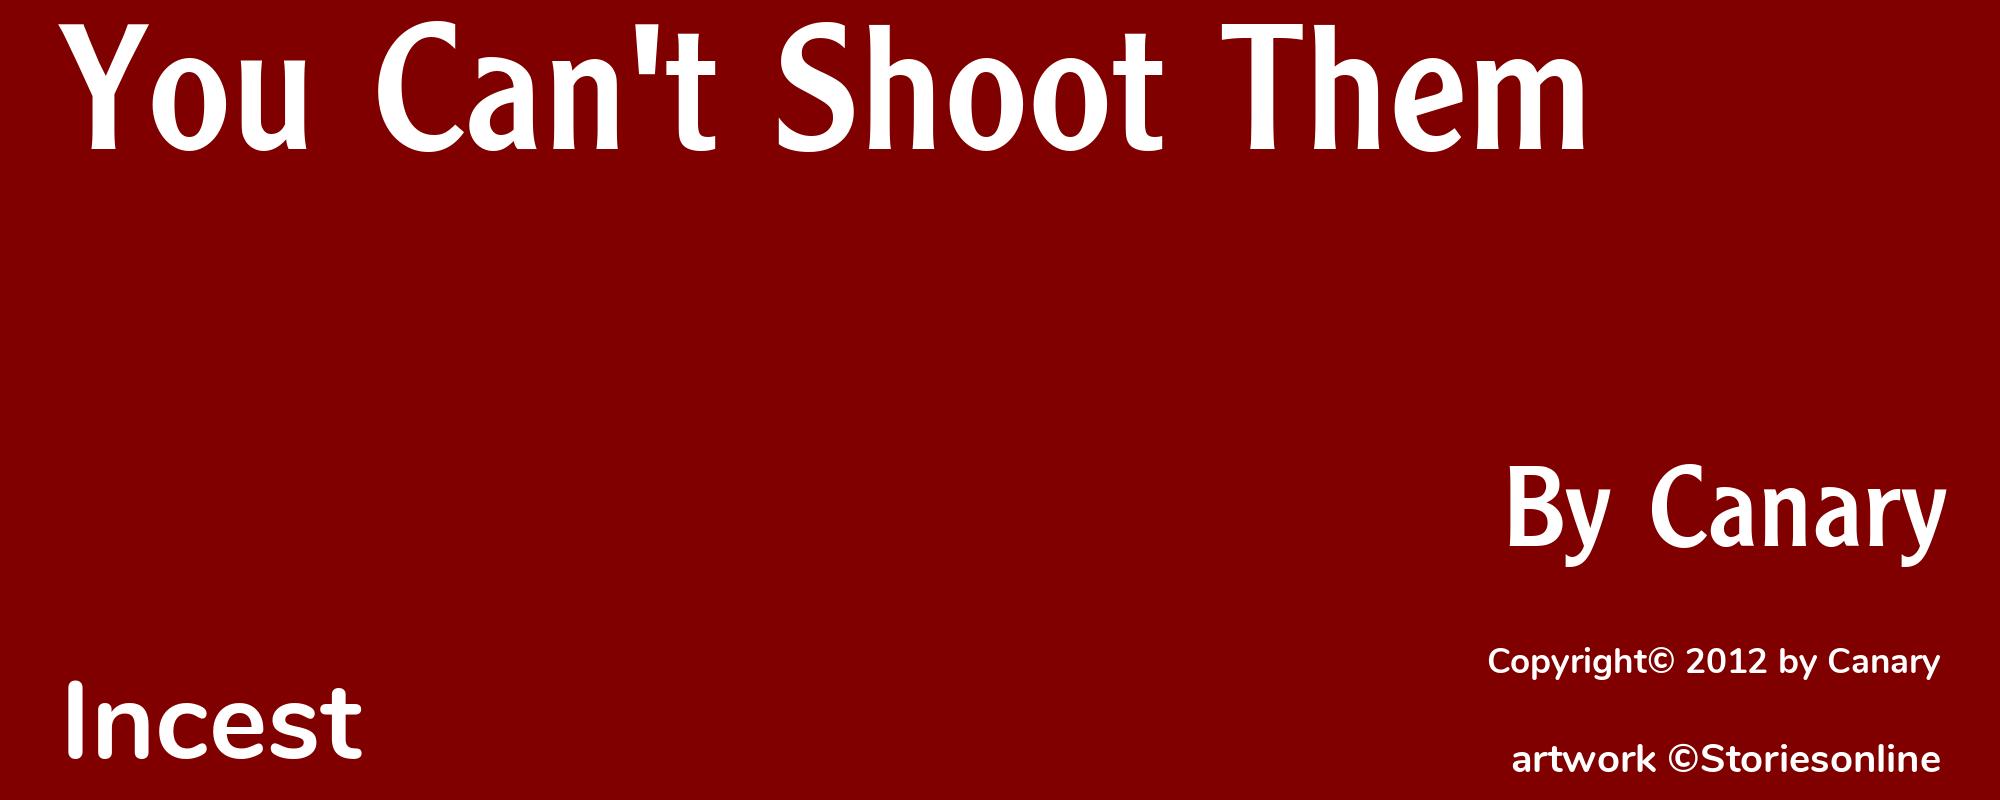 You Can't Shoot Them - Cover